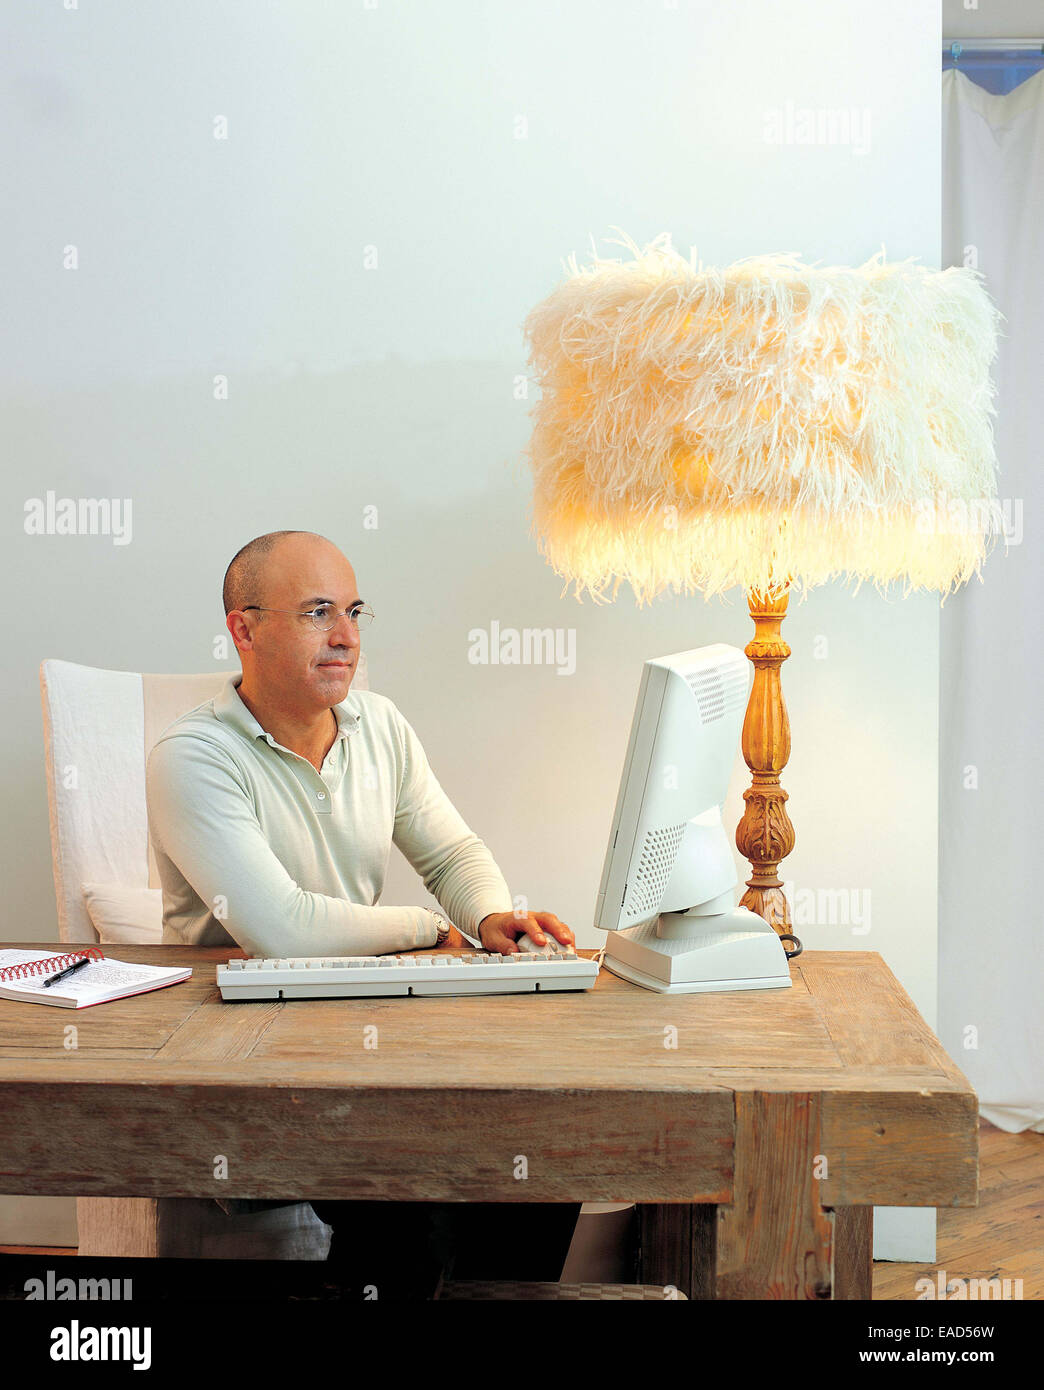 man works at computer with feathered lamp Stock Photo